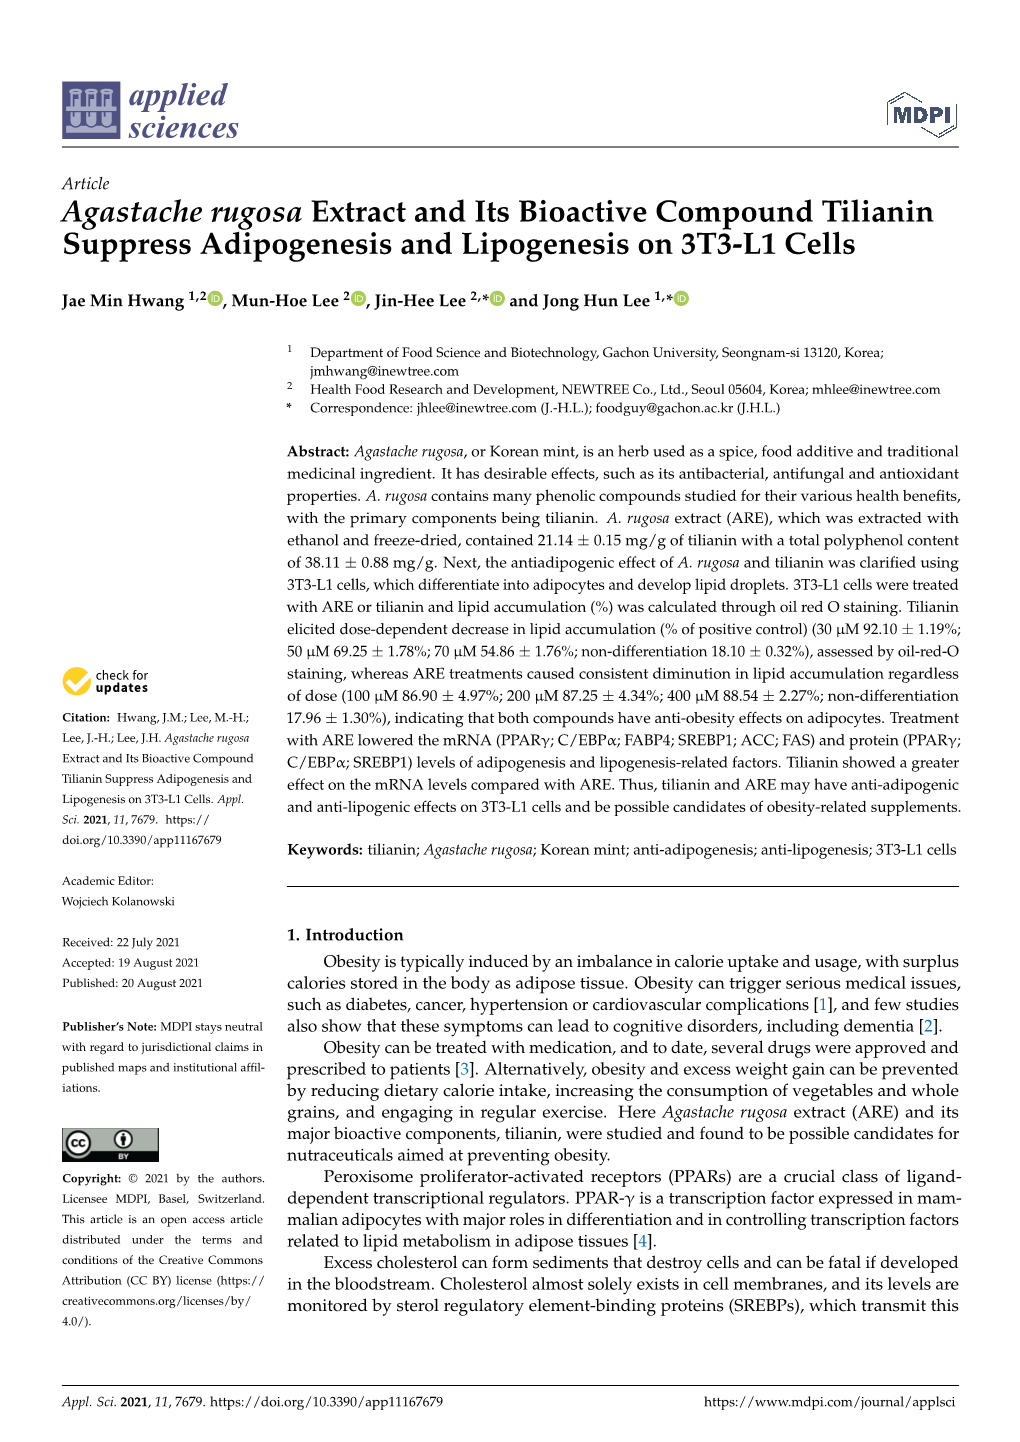 Agastache Rugosa Extract and Its Bioactive Compound Tilianin Suppress Adipogenesis and Lipogenesis on 3T3-L1 Cells